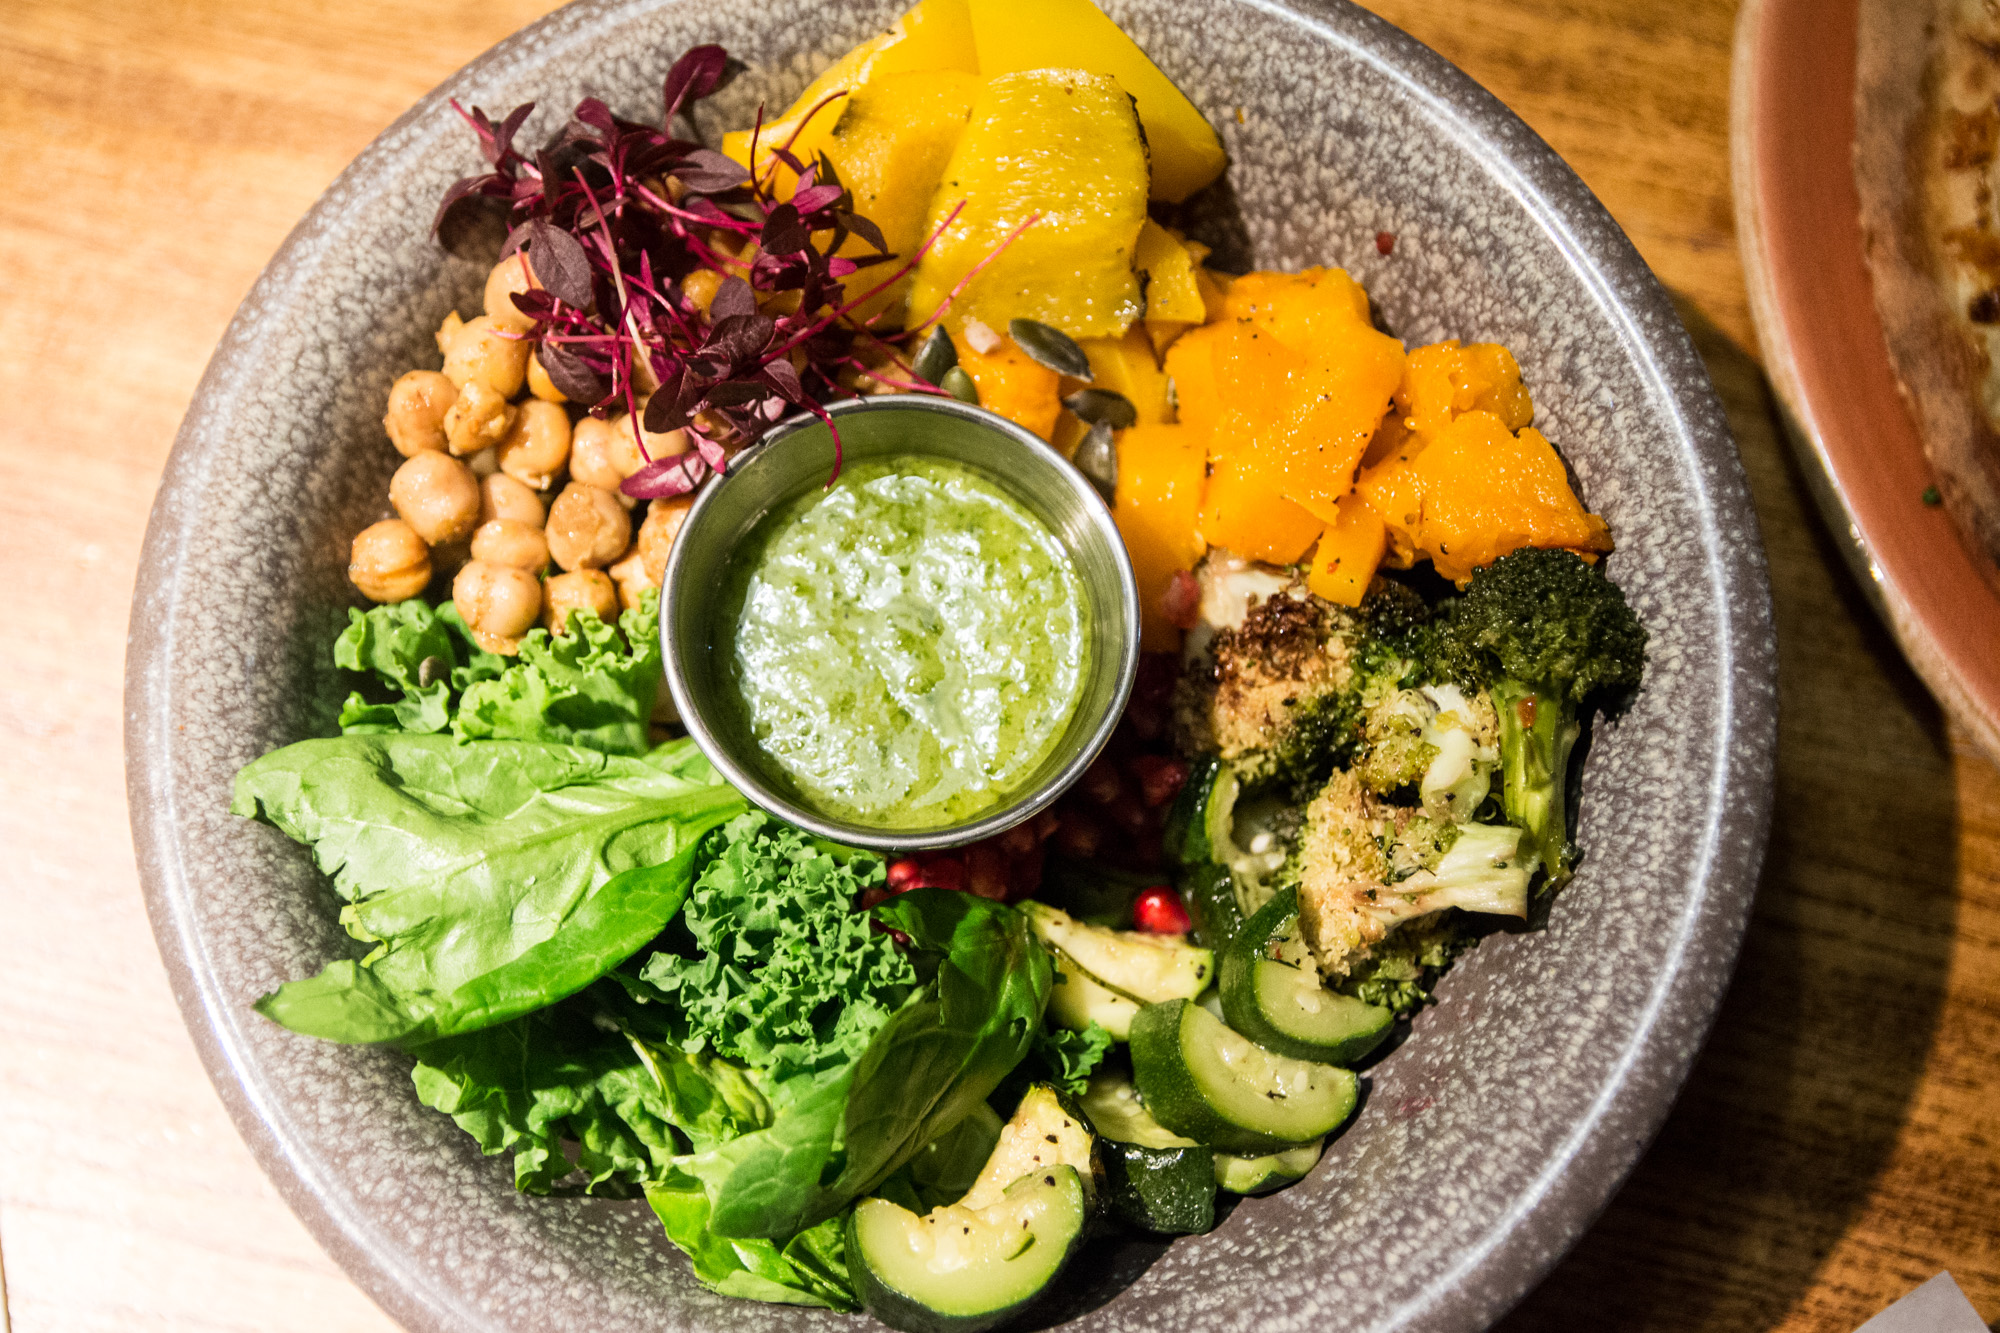 Vegan Food in Manchester - Our top picks for eating vegan in Manchester